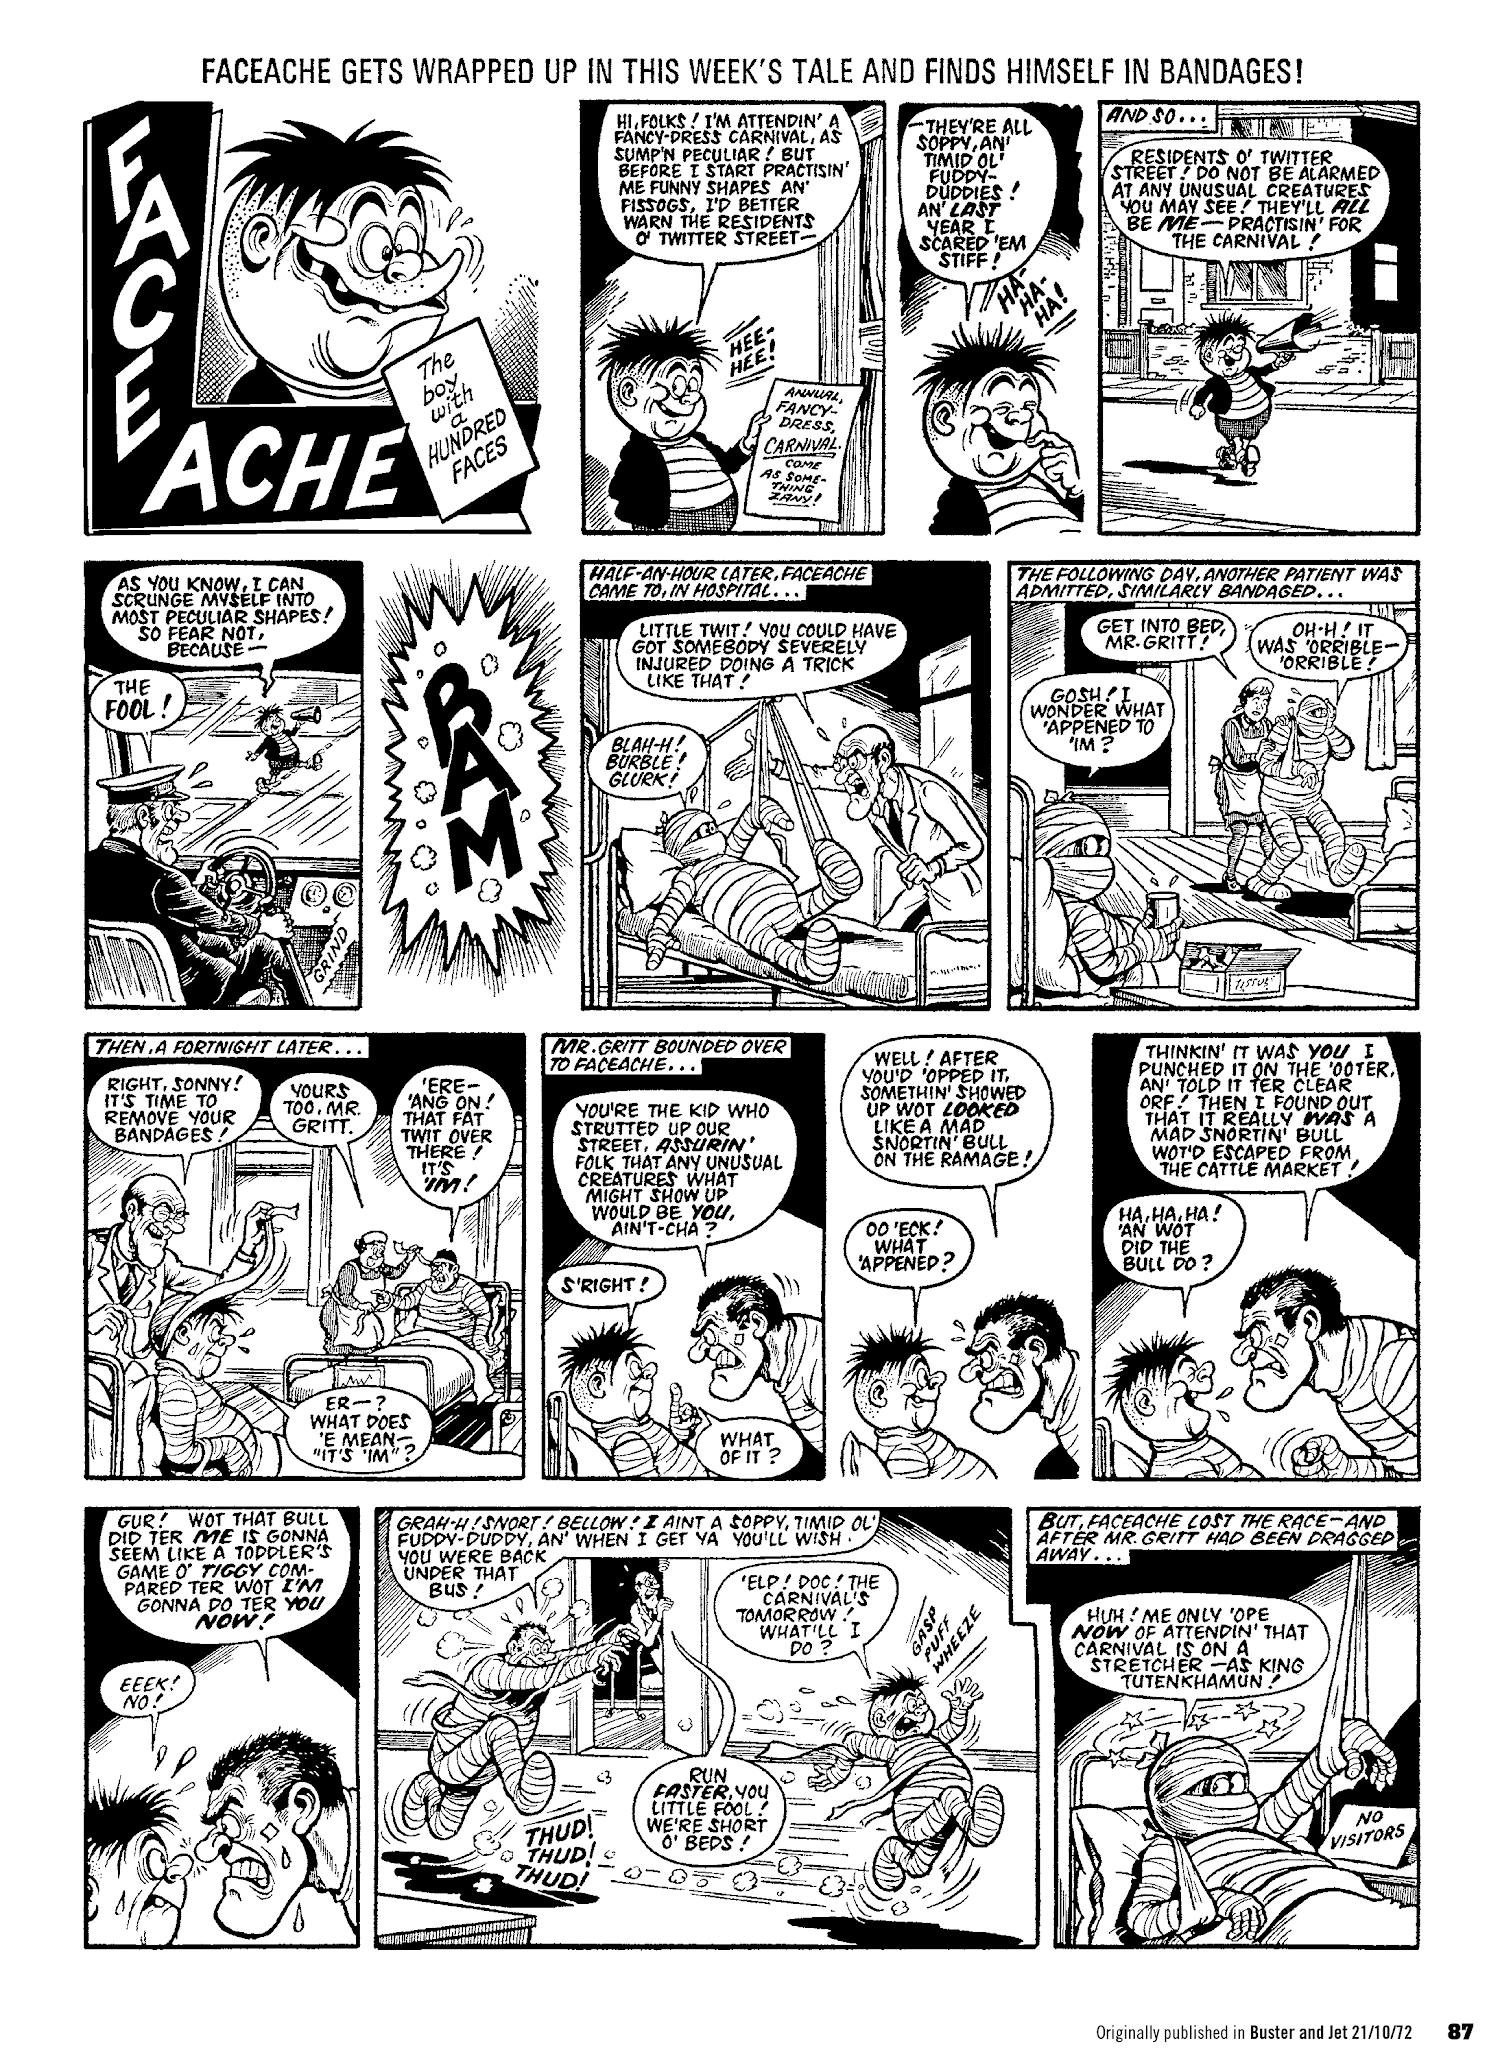 Read online Faceache: The First Hundred Scrunges comic -  Issue # TPB 1 - 89